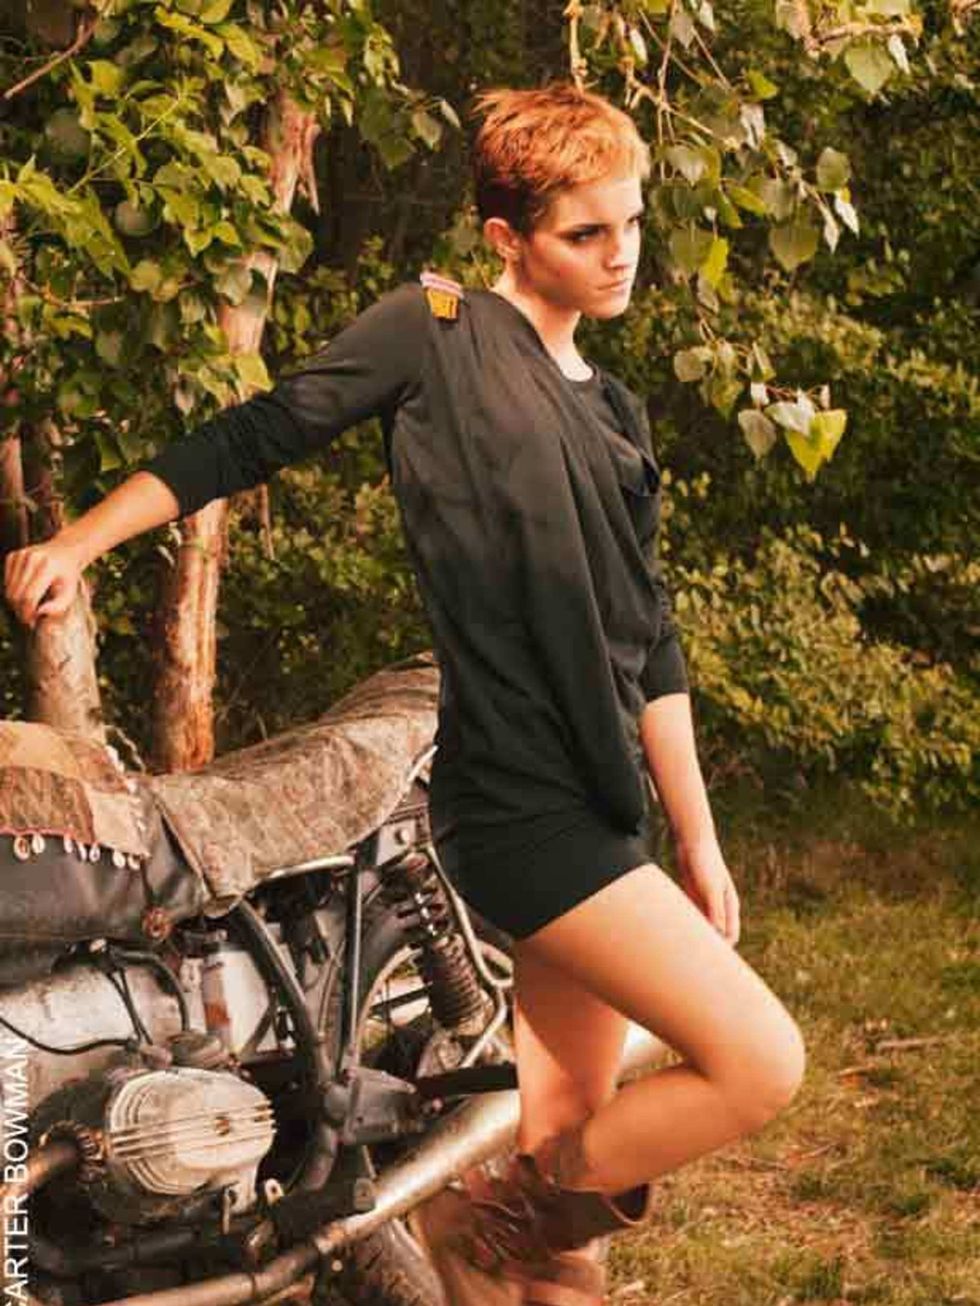 <p><a href="http://www.elleuk.com/starstyle/style-files/%28section%29/emma-watson">Emma Watson</a> proves eco-fashion can be edgy in her final collection for People Tree</p>